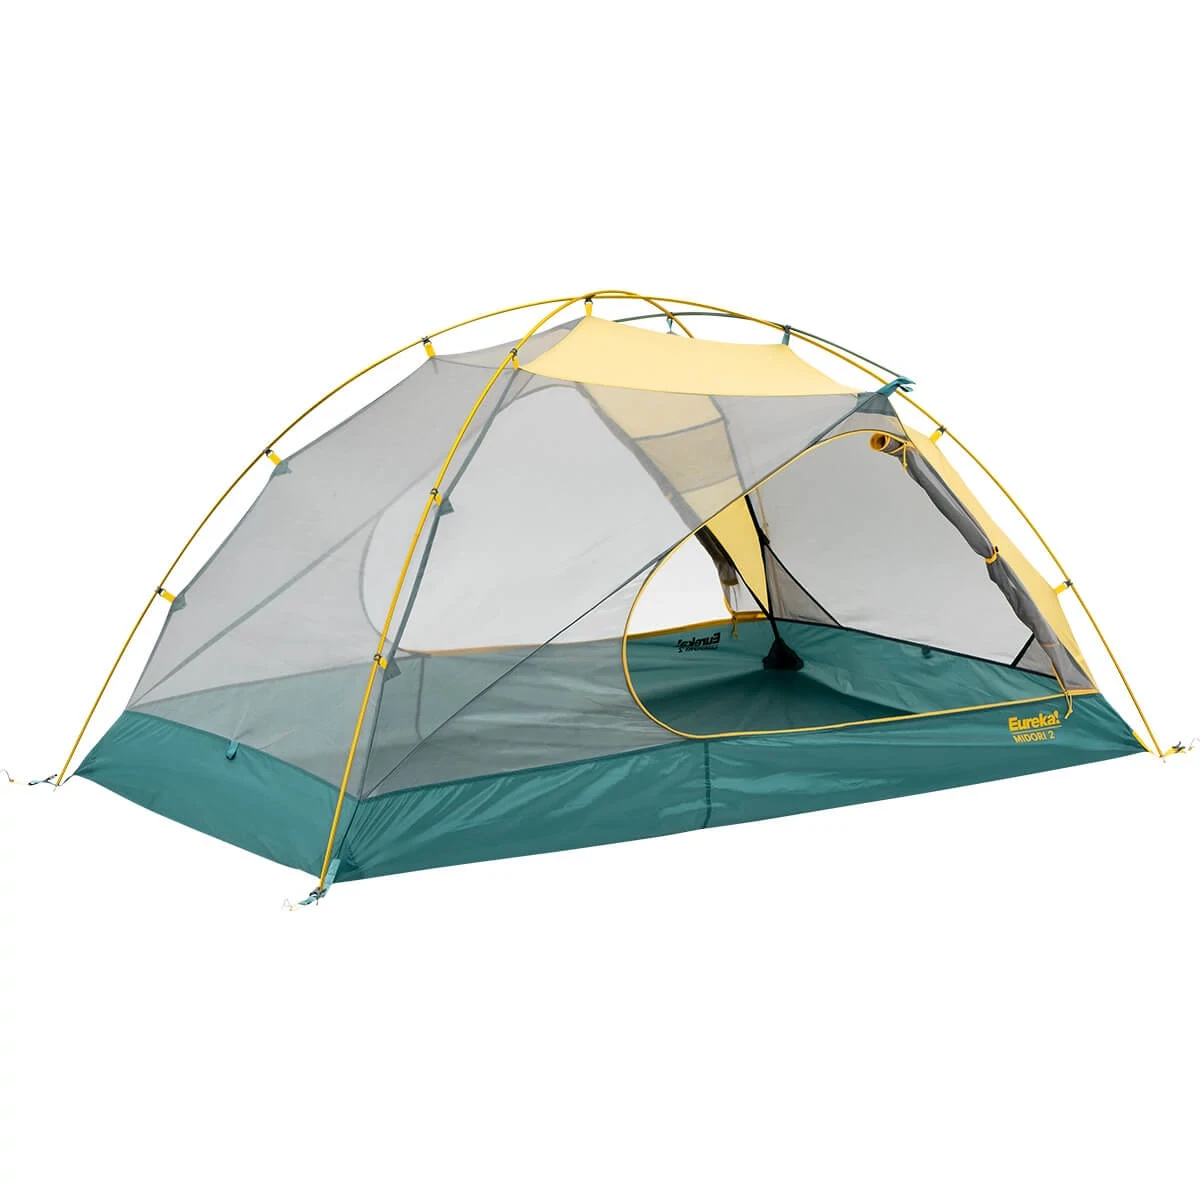 Midori 2 tent with rainfly off